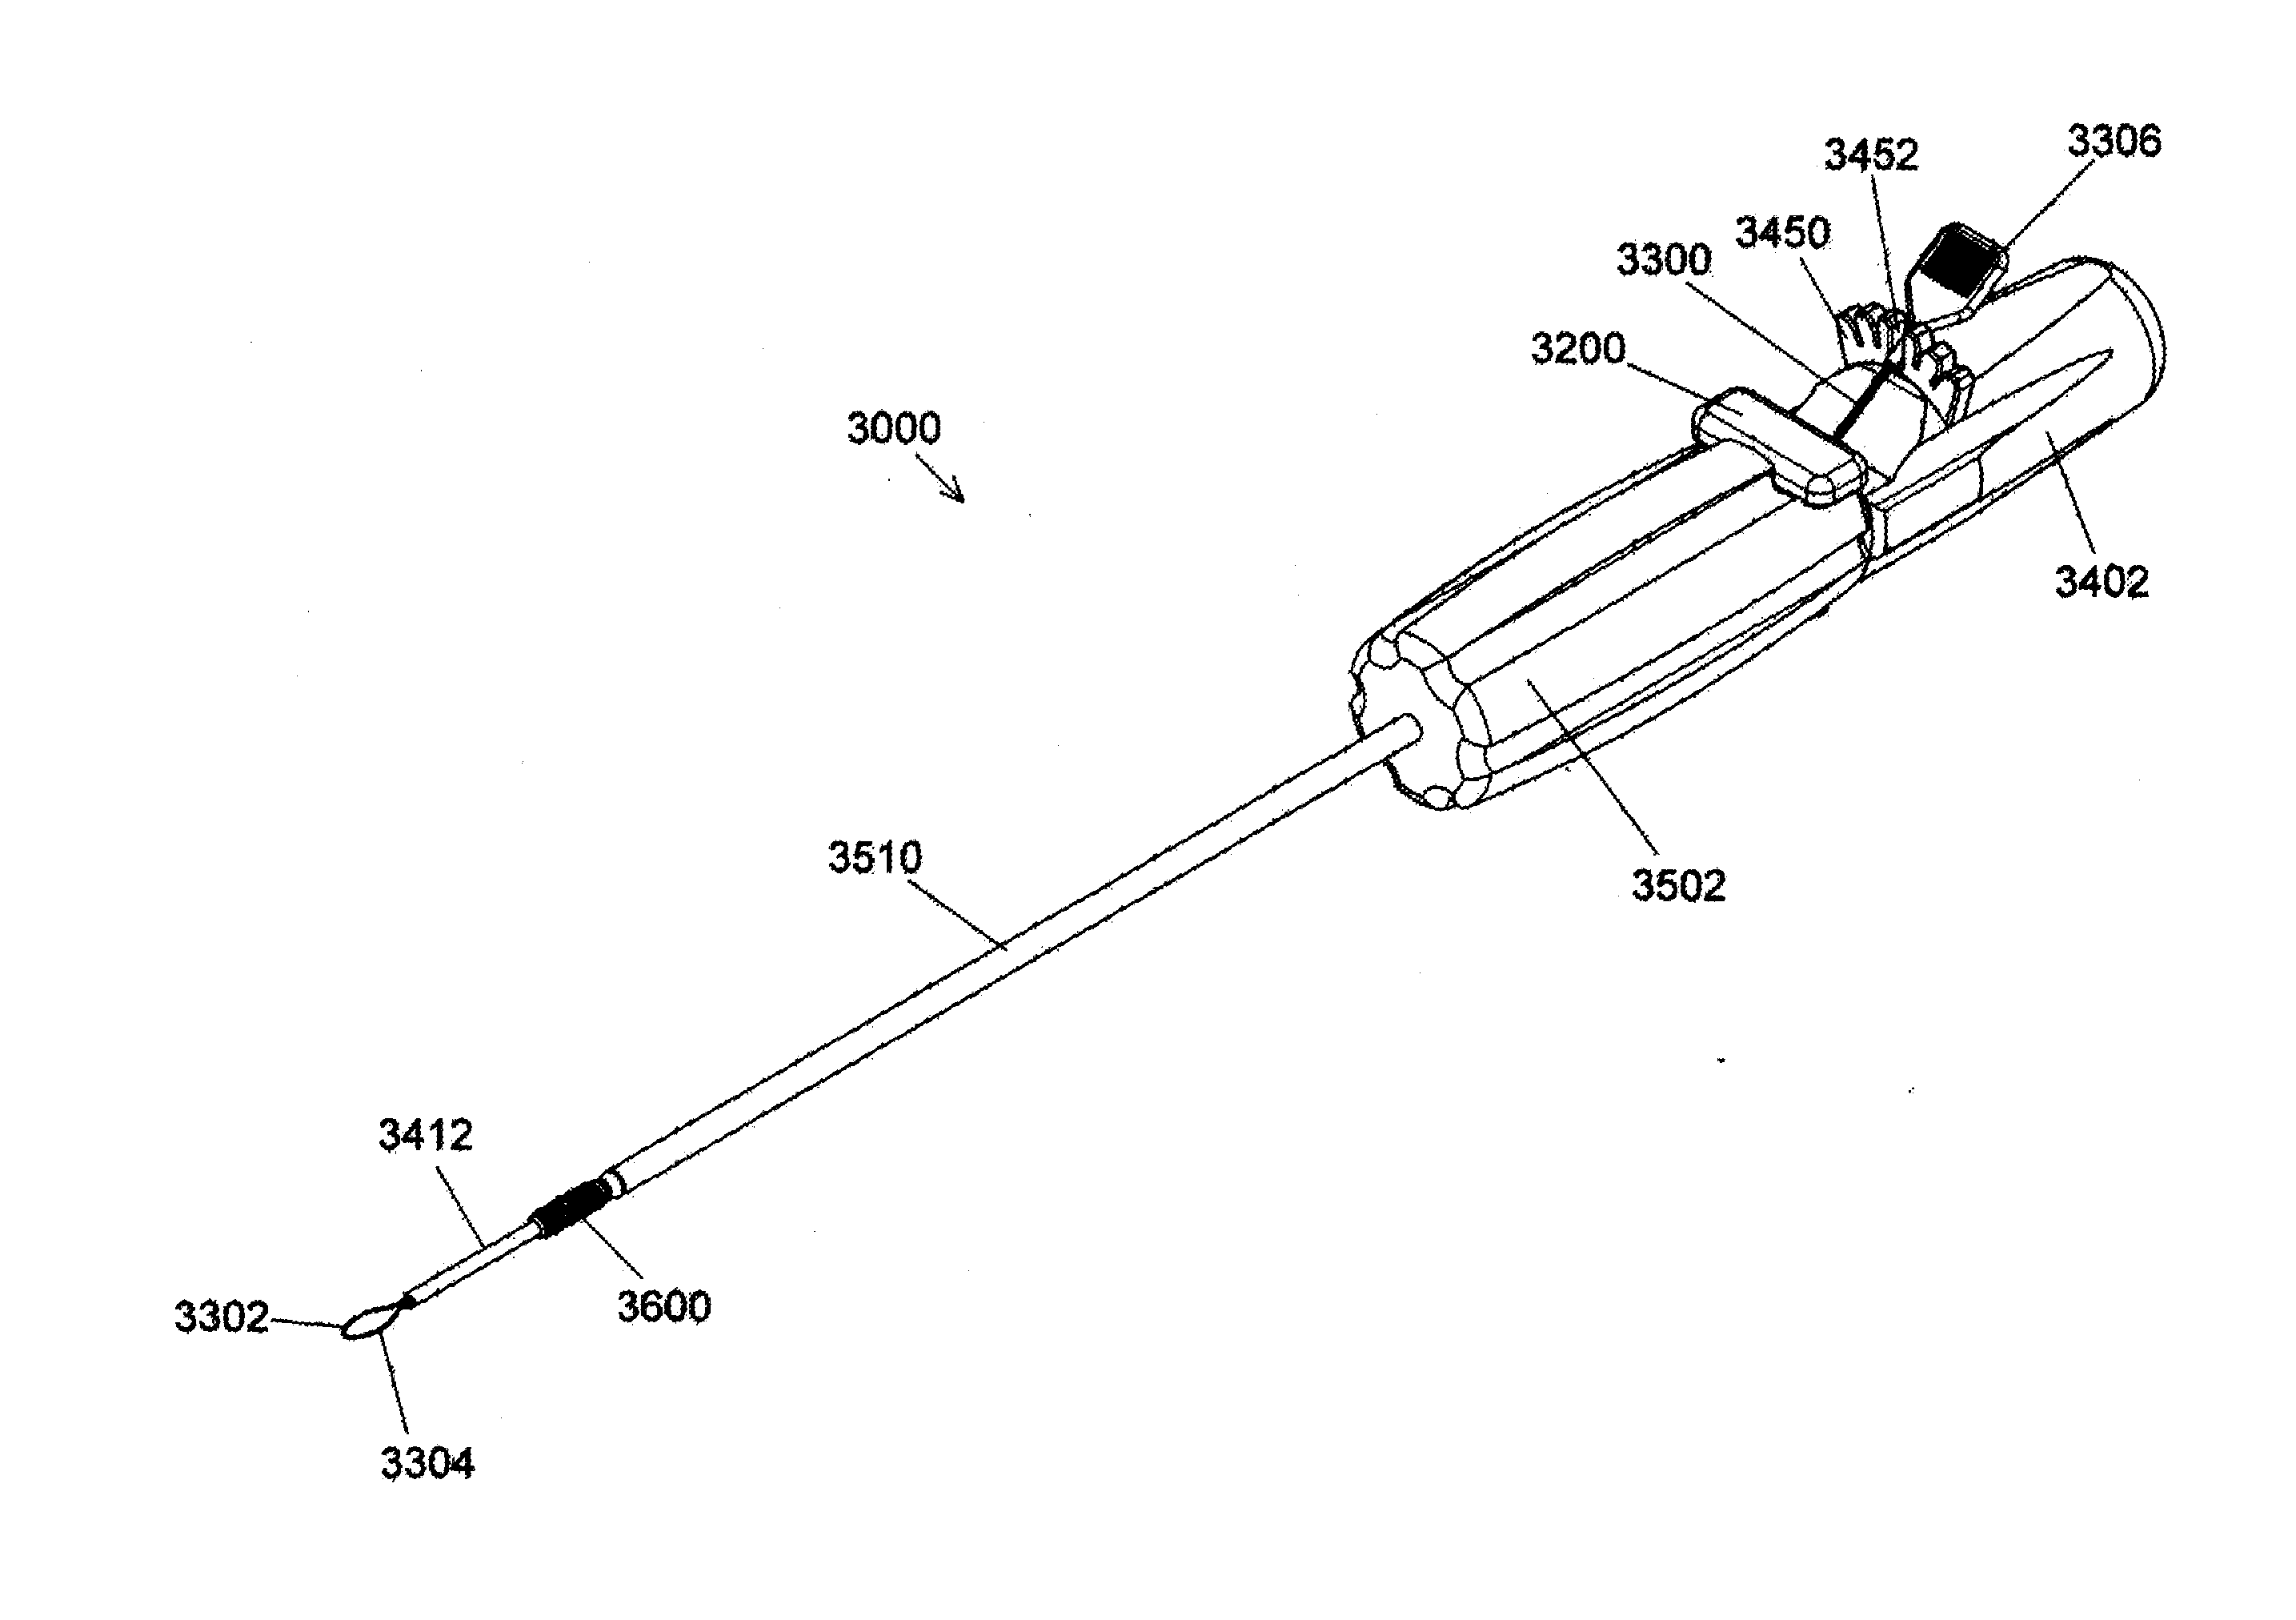 Implant placement systems, devices, and methods